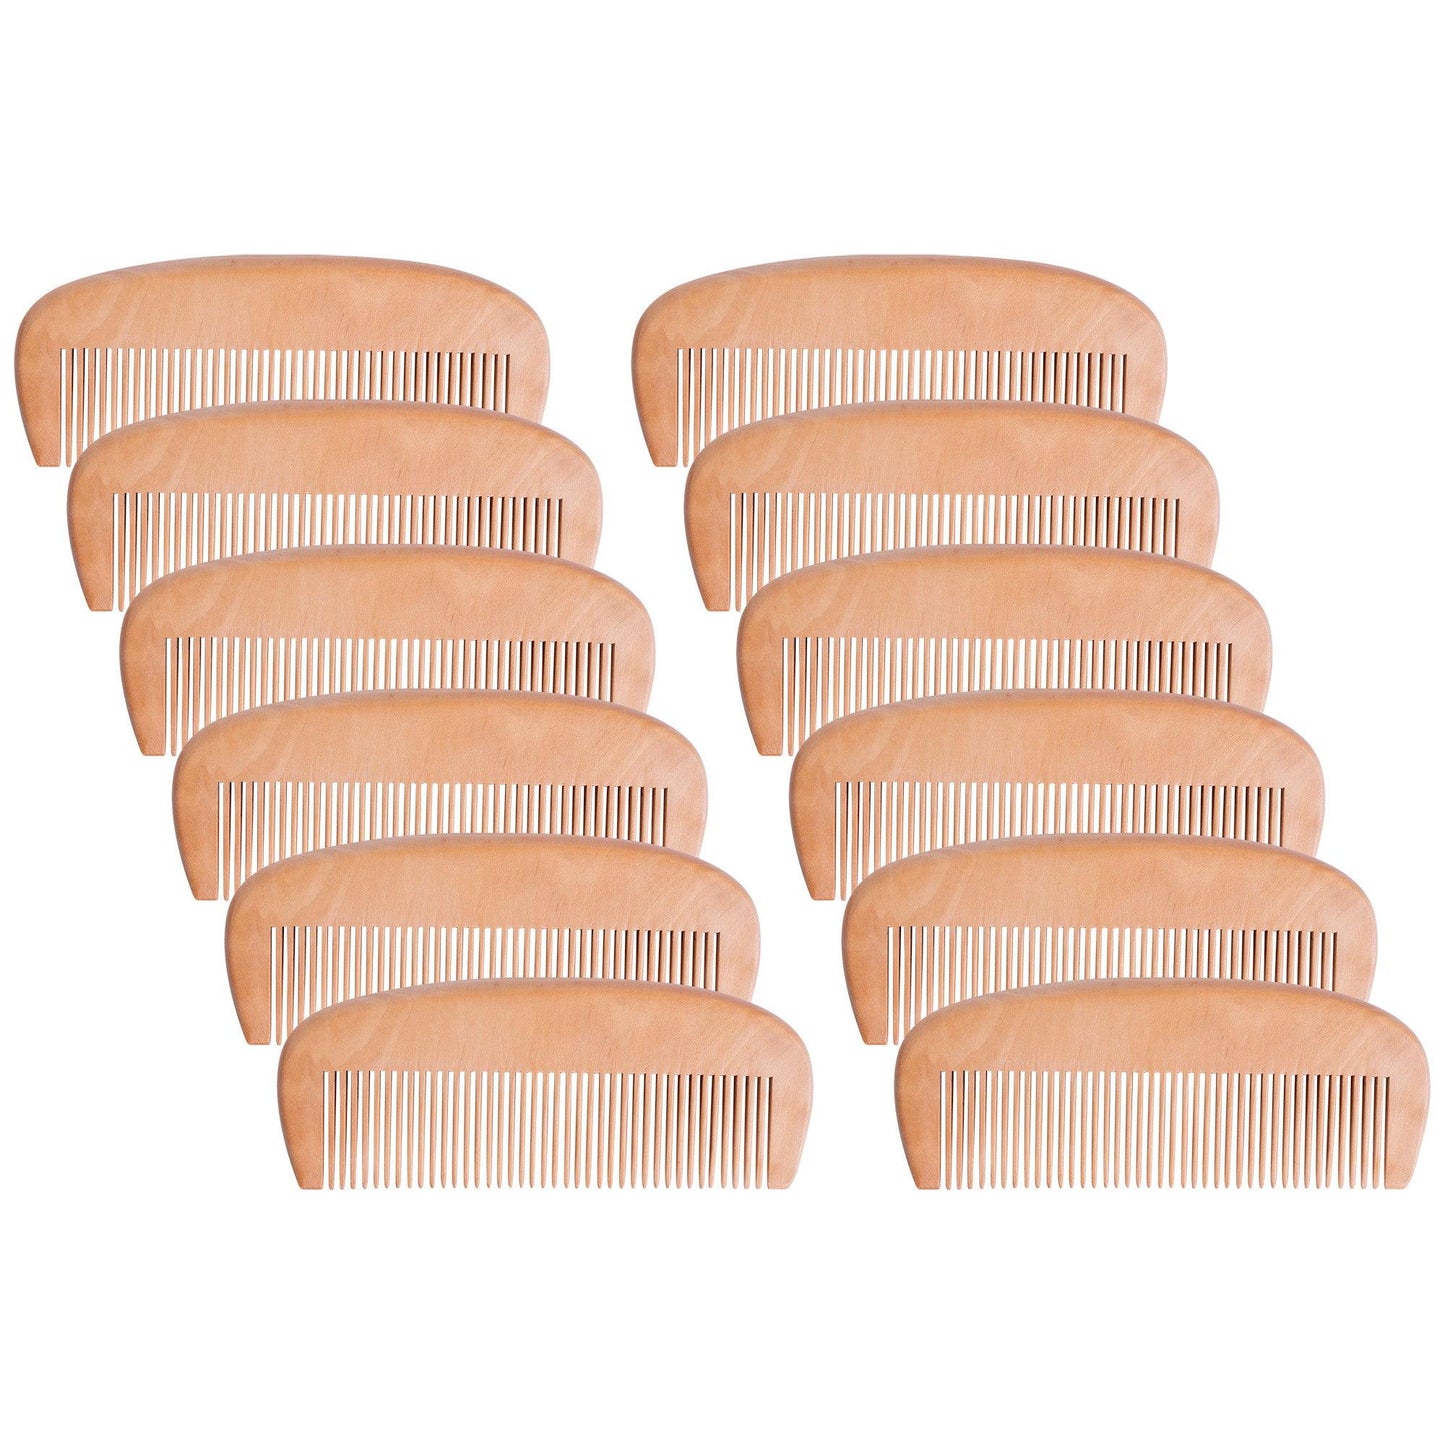 One-Sided Wooden Combs